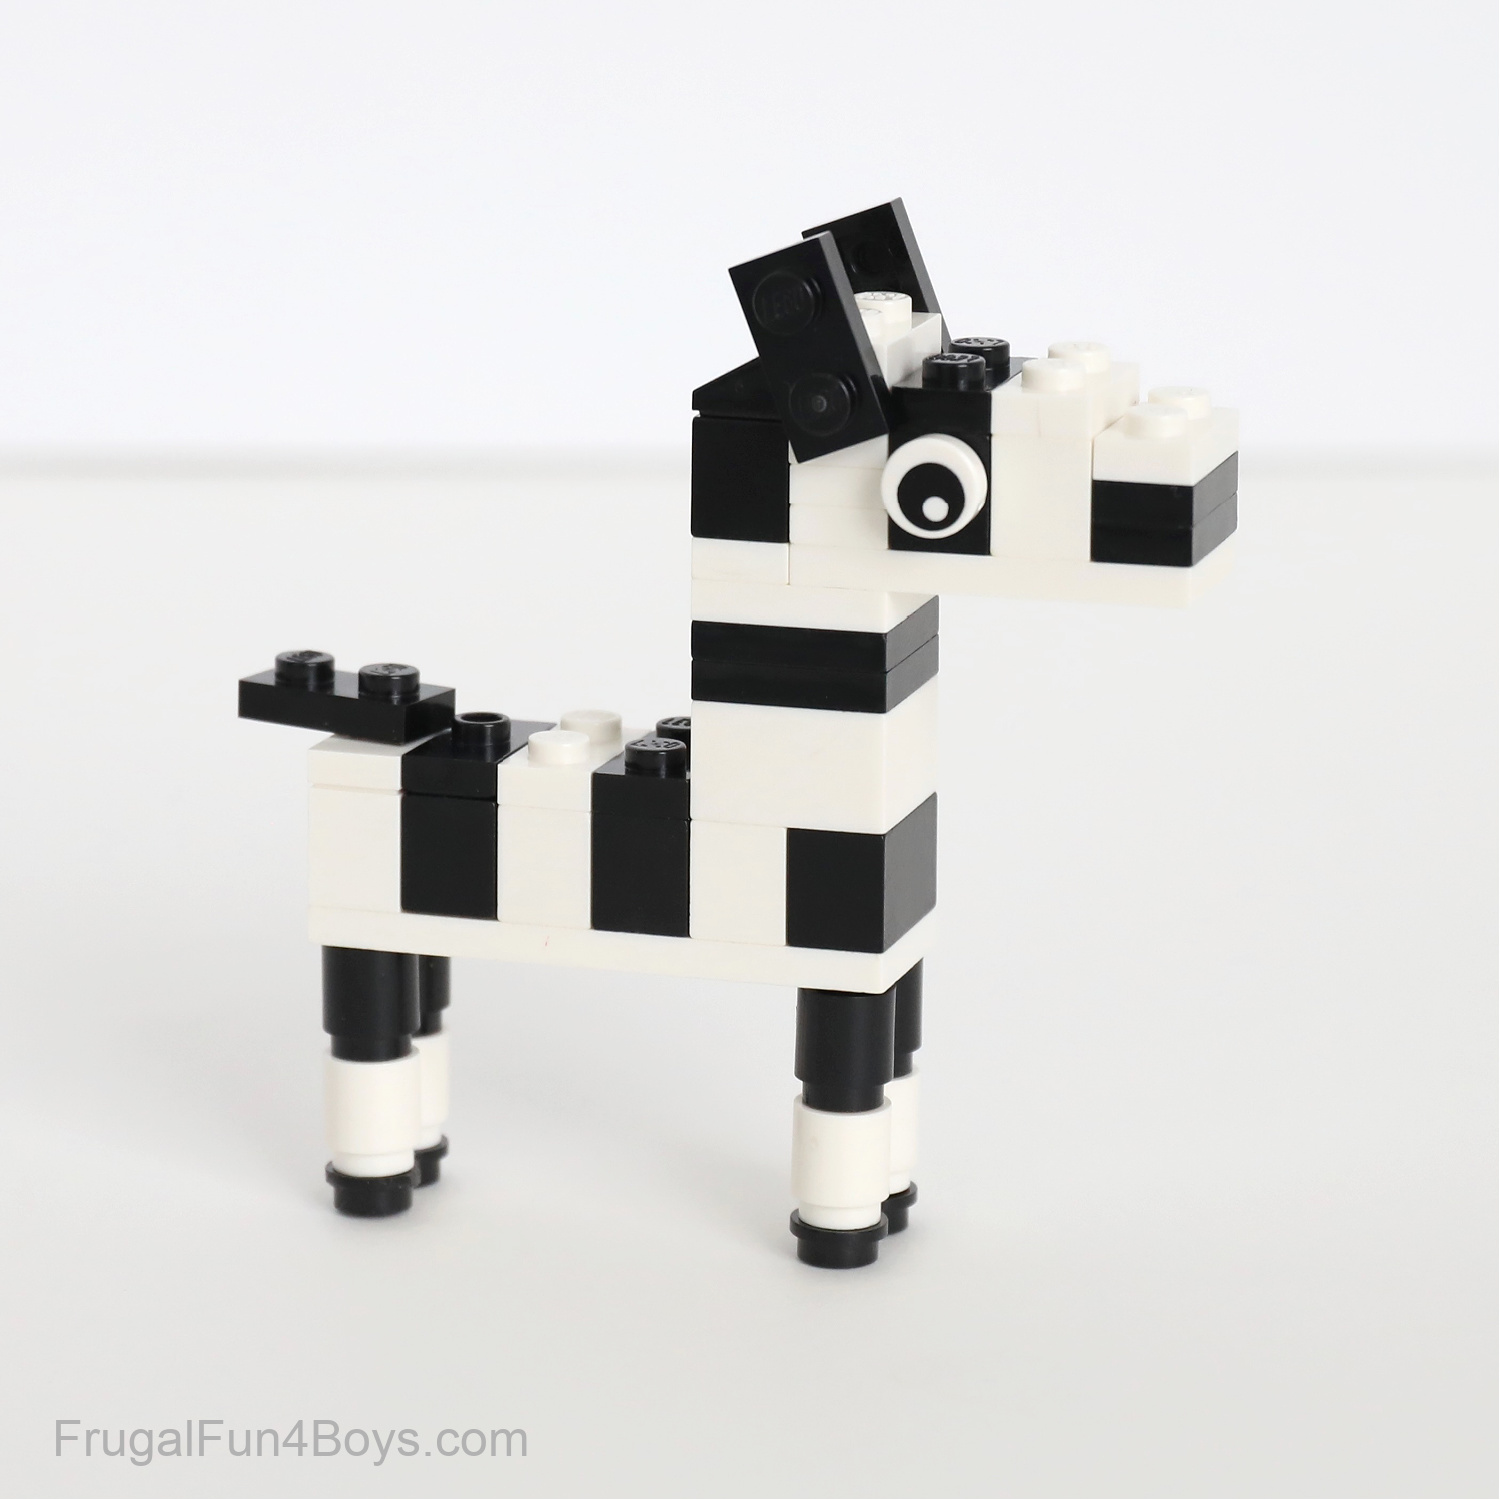 How to Build Awesome LEGO Animals - Frugal Fun For Boys and Girls